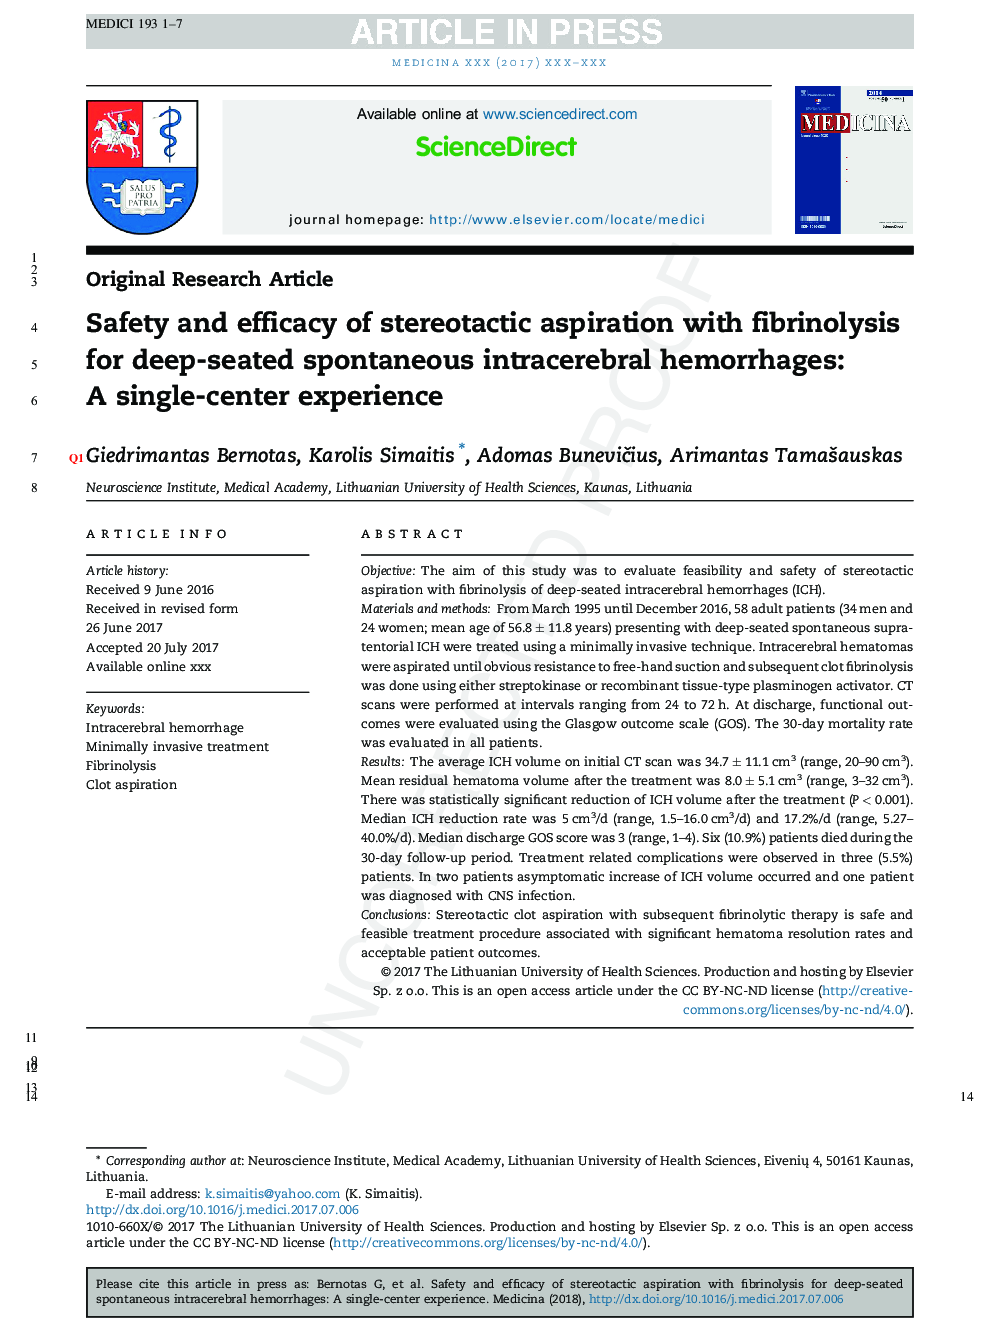 Safety and efficacy of stereotactic aspiration with fibrinolysis for deep-seated spontaneous intracerebral hemorrhages: A single-center experience